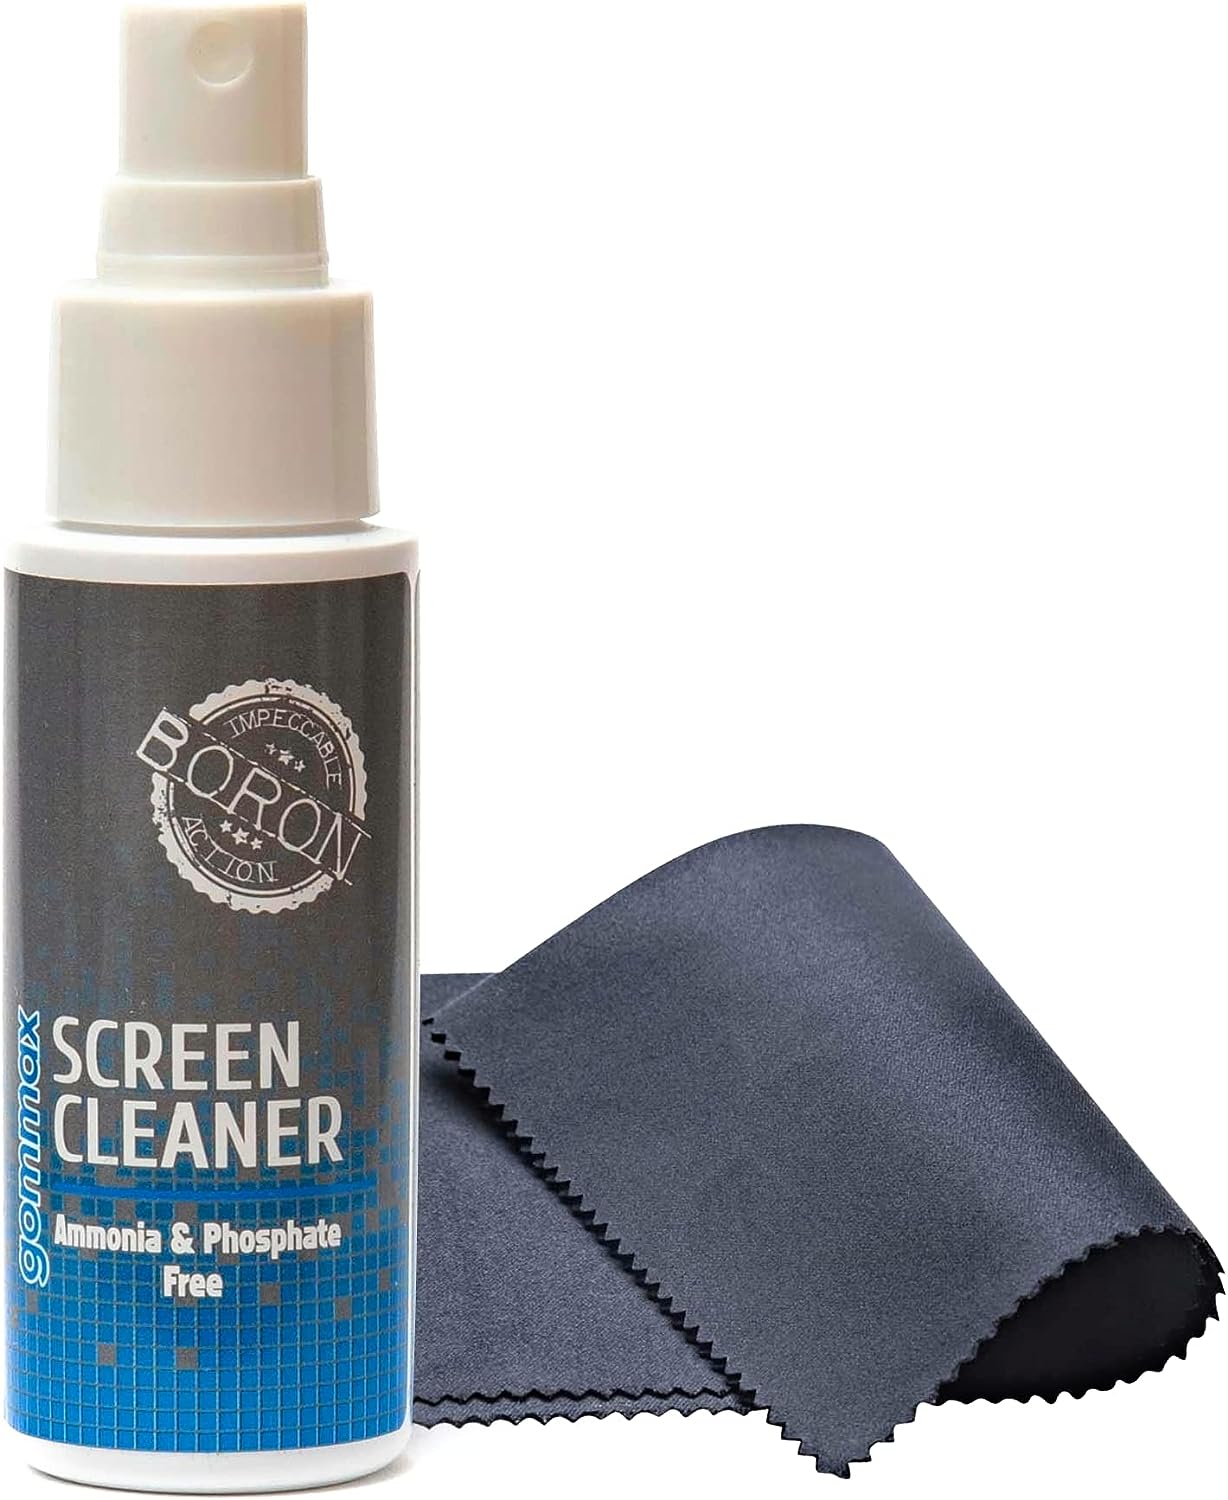 Screen Cleaner Spray Bottle with Microfiber Cloth for [...]